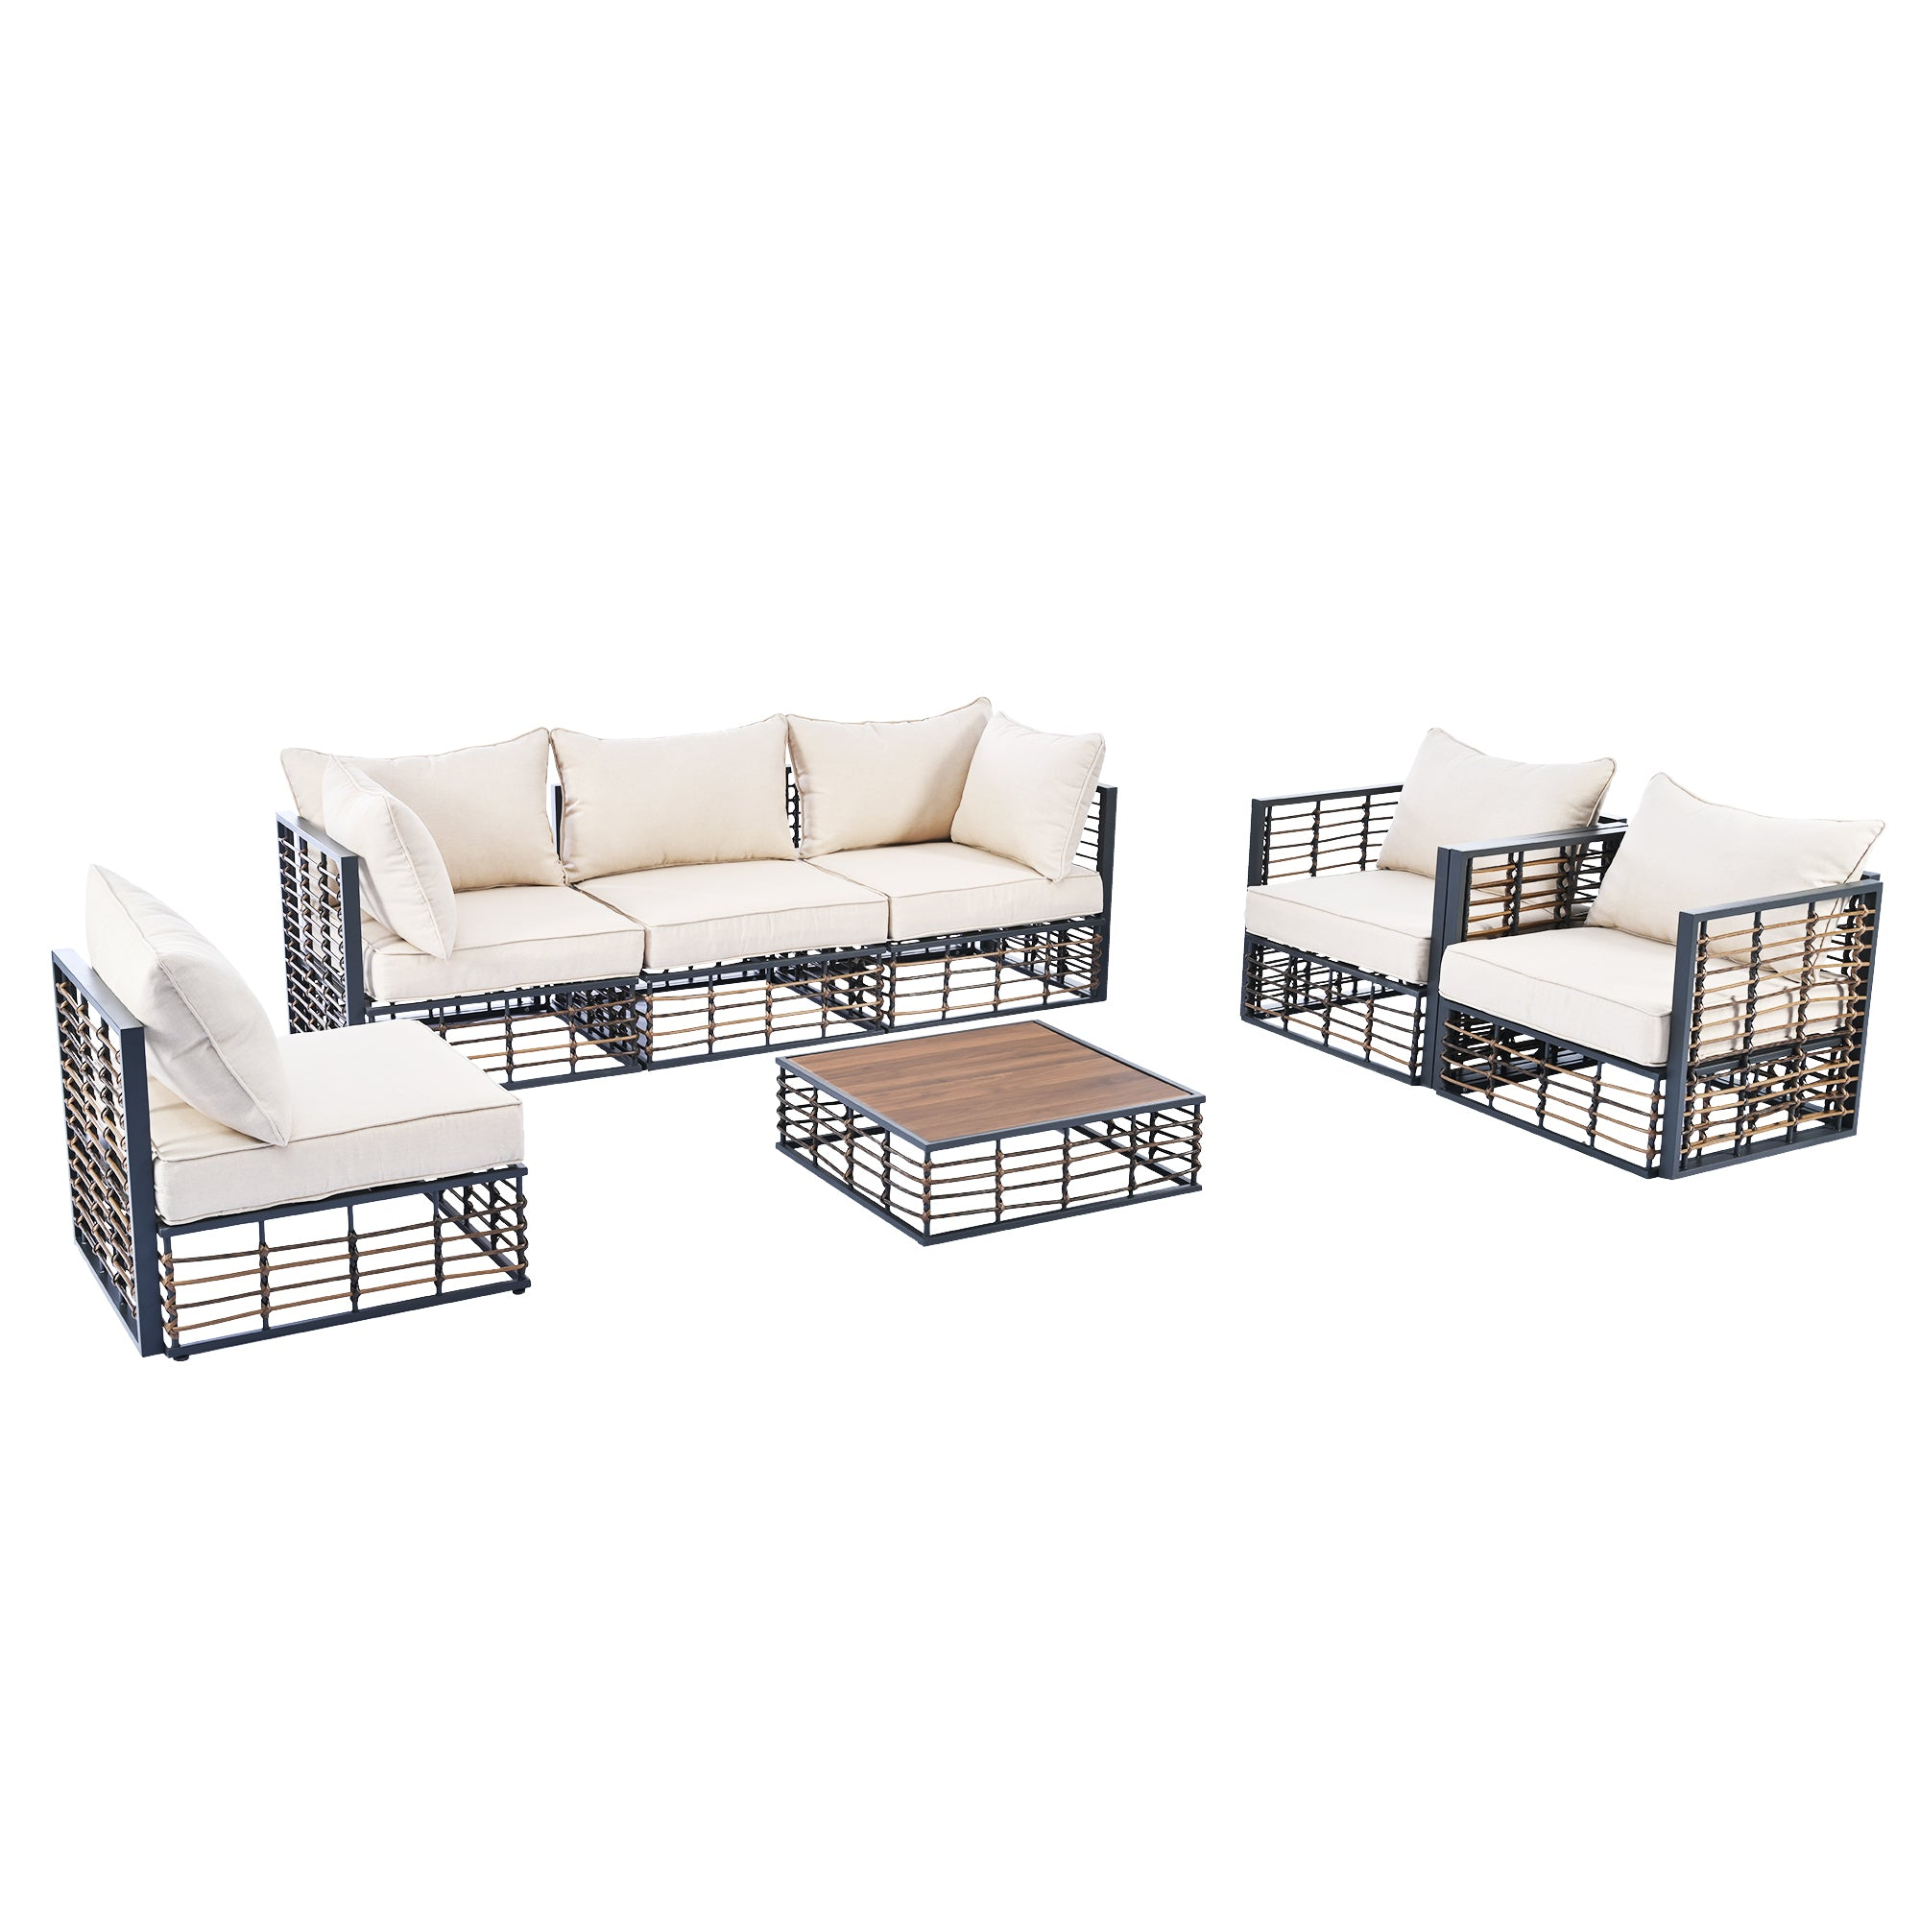 Modern Minimalist 7-Piece Metal Patio Sectional Sofa Set, All-Weather Garden Conversational Furniture Set with Thick Cushions and Coffee Table for Indoor Outdoor, Gray Môdern Space Gallery